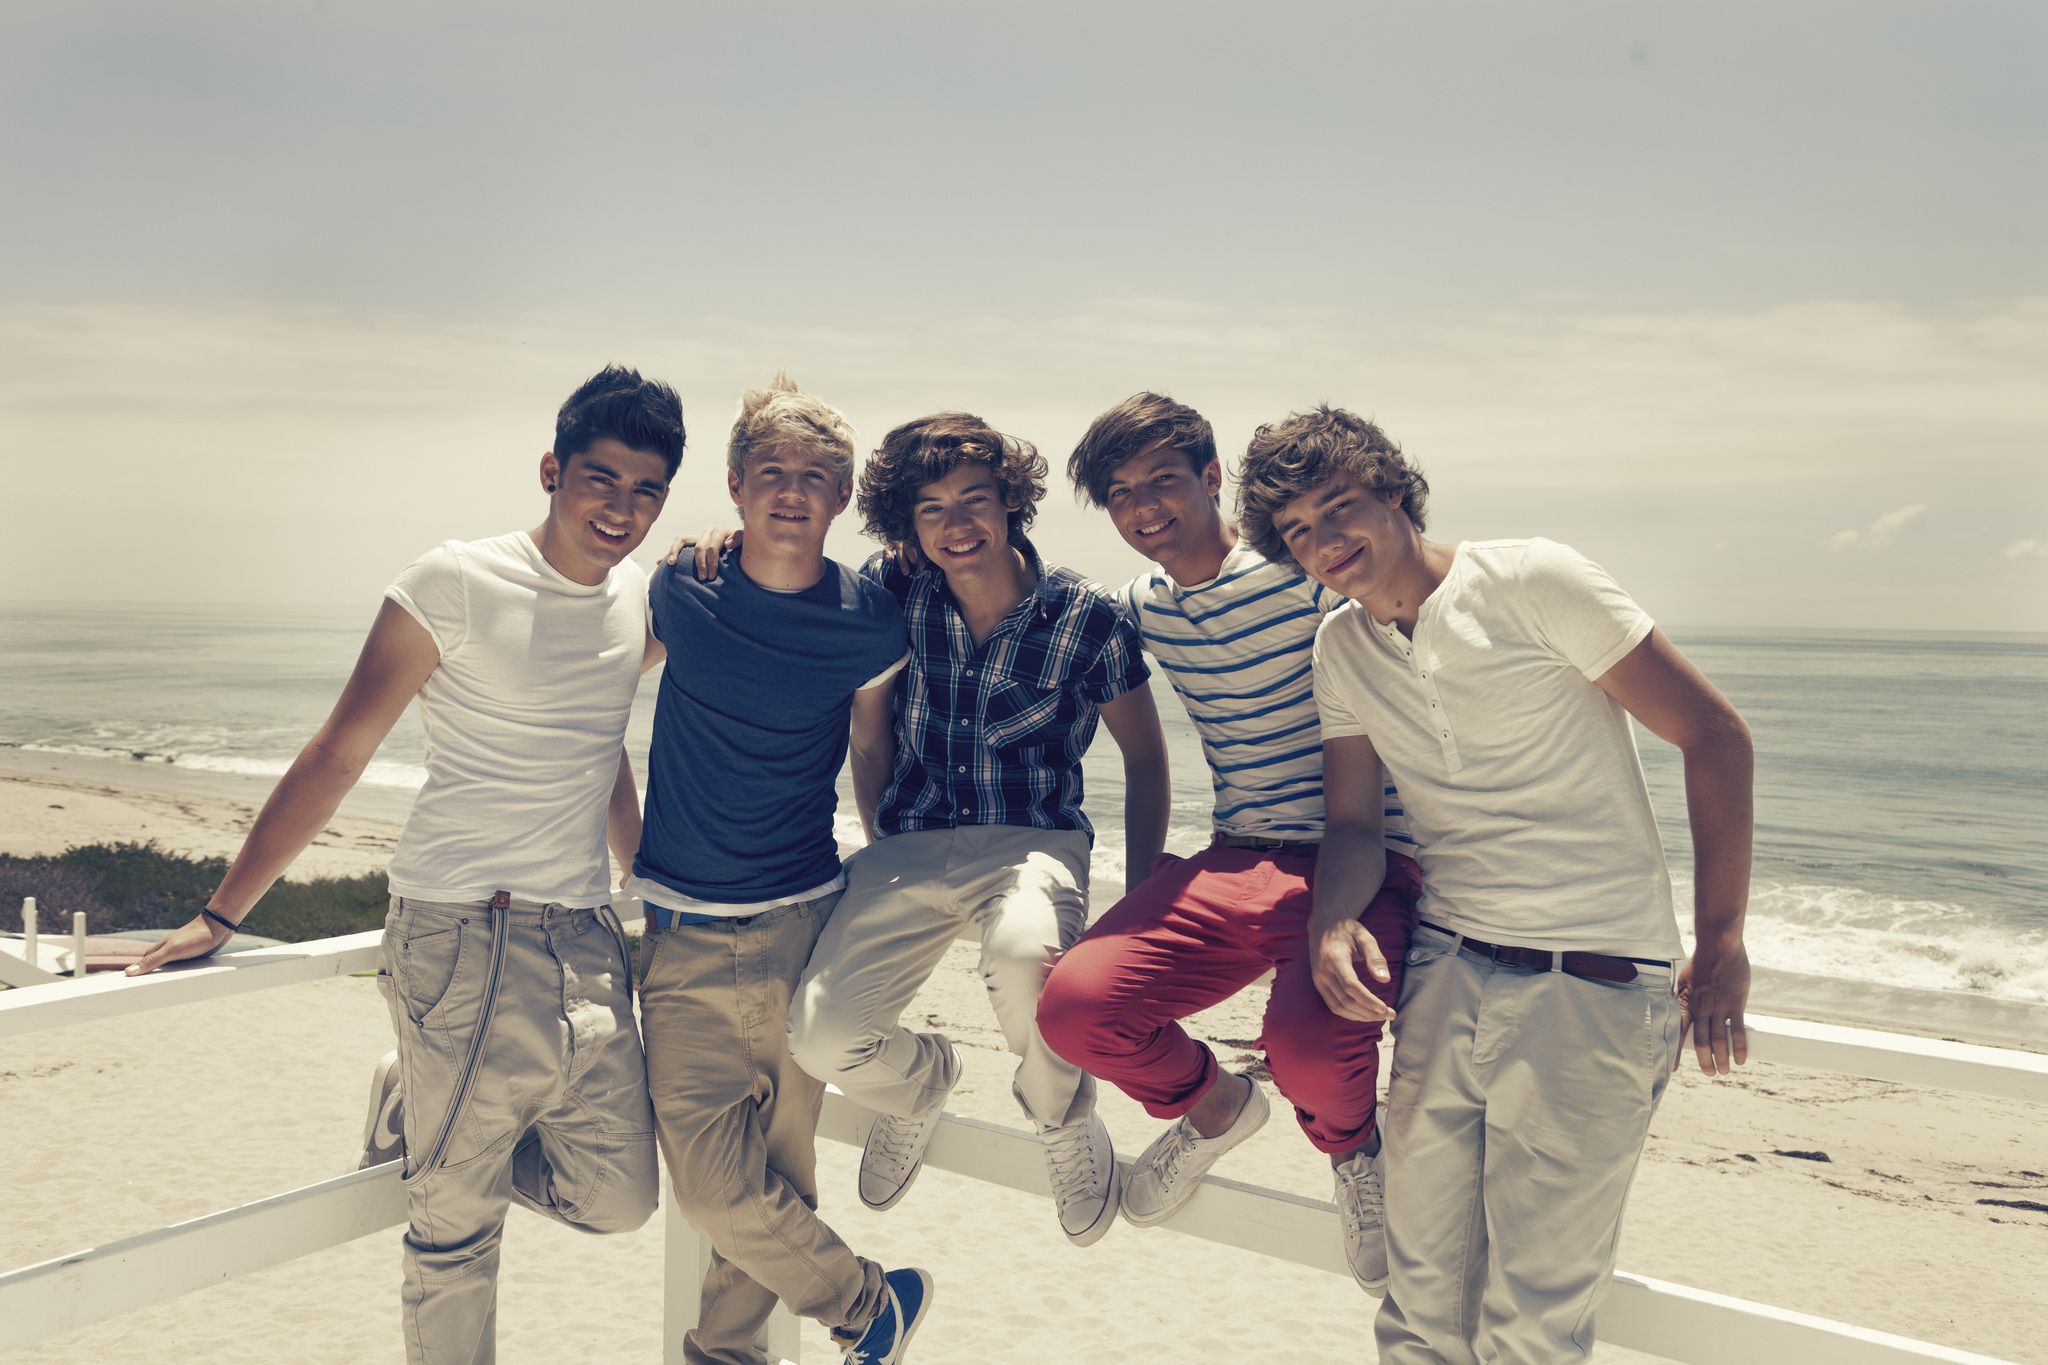 One Direction What Makes You Beautiful Wallpapers Wallpaper Cave